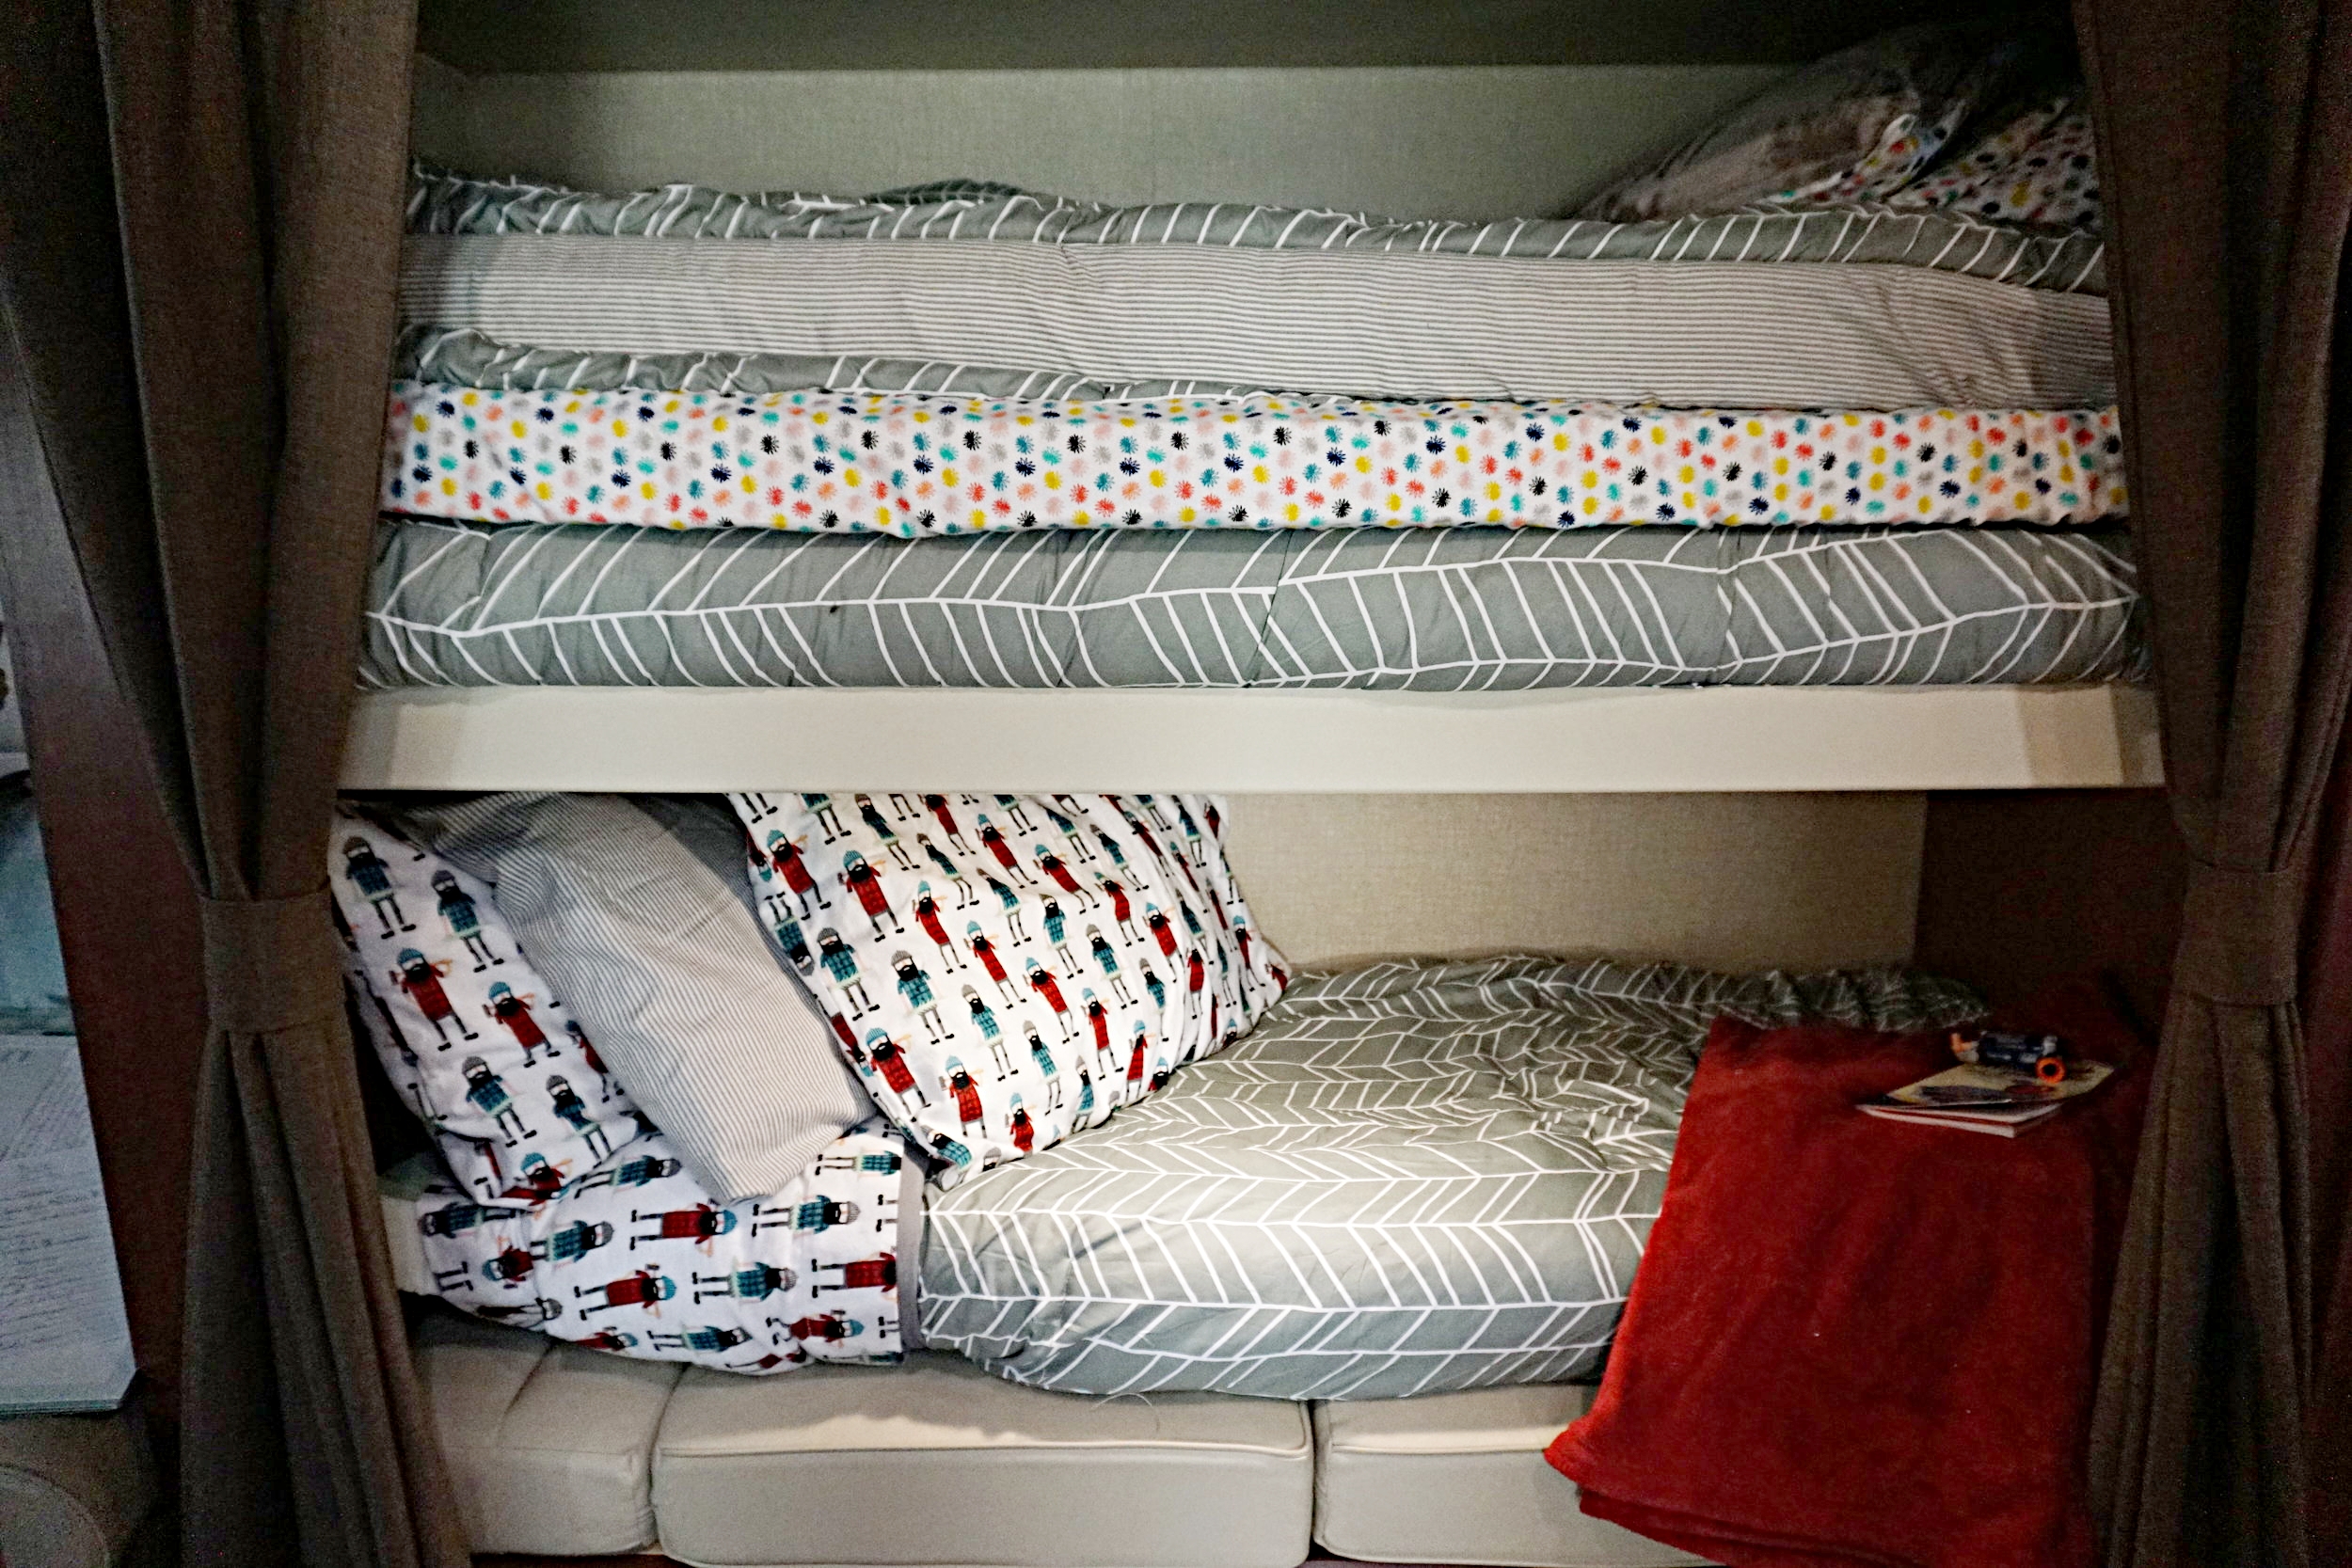 Rv Bunk Bedding Sherer Joy Journey, Rv Double Bunk Bed Sheets